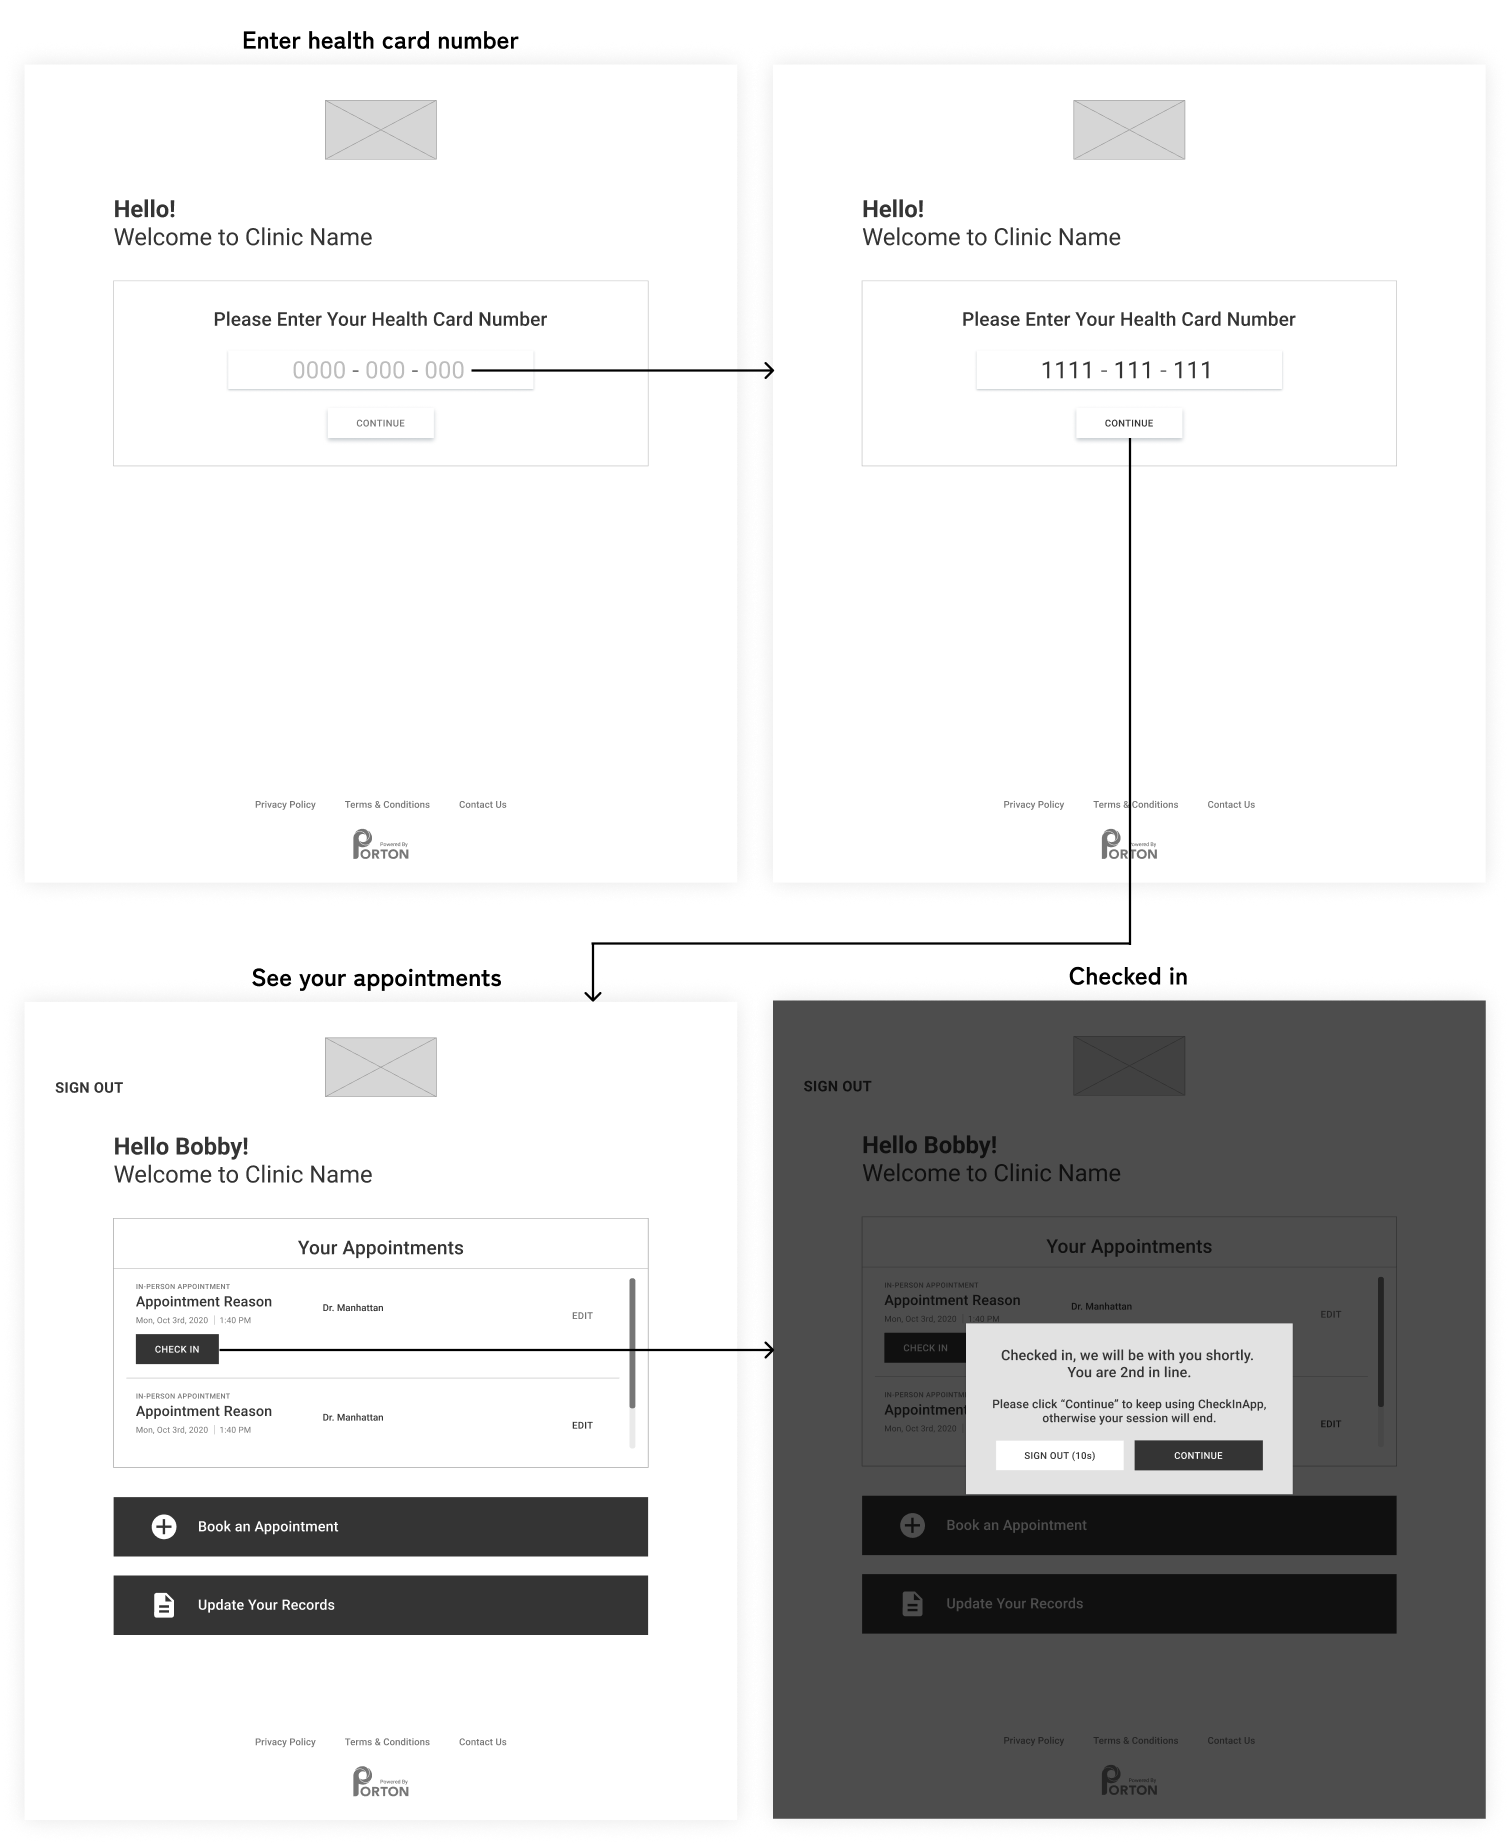 Initial wireframe of new CheckInApp